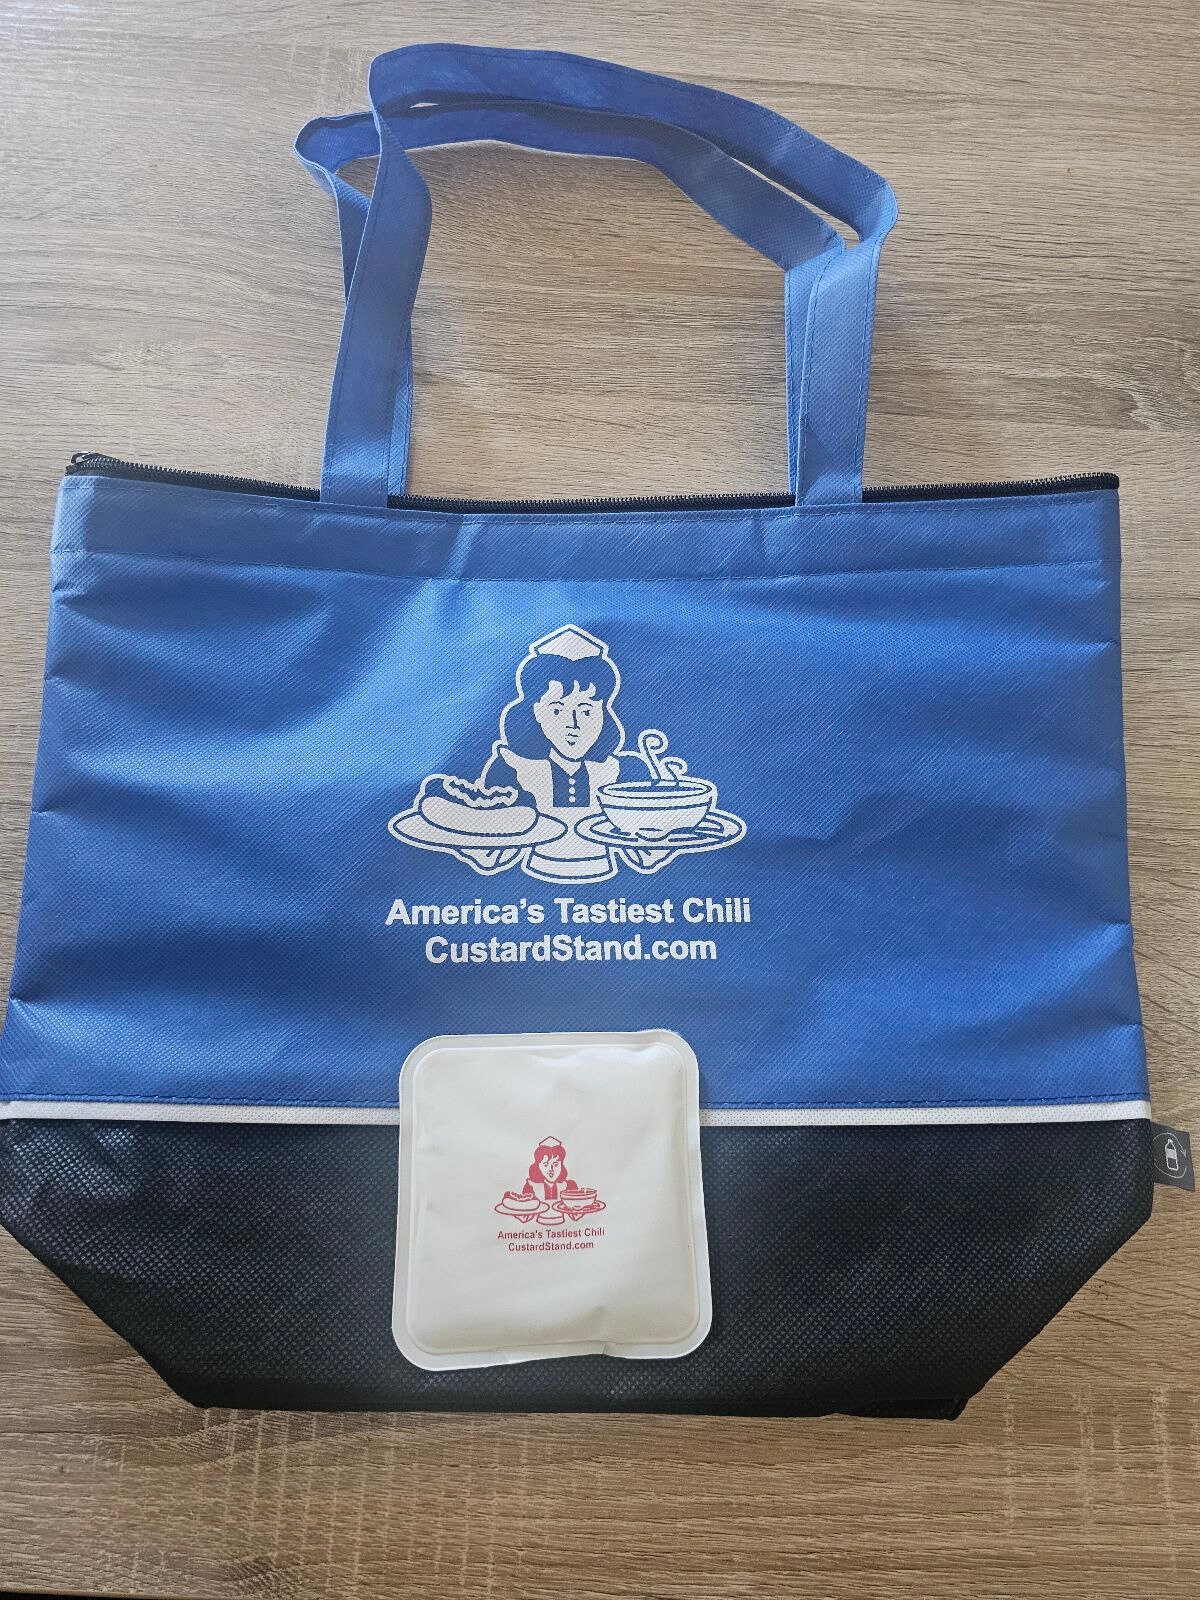 Free Cooler Tote &#038; Freezer Bag with Purchase of Any Food Product